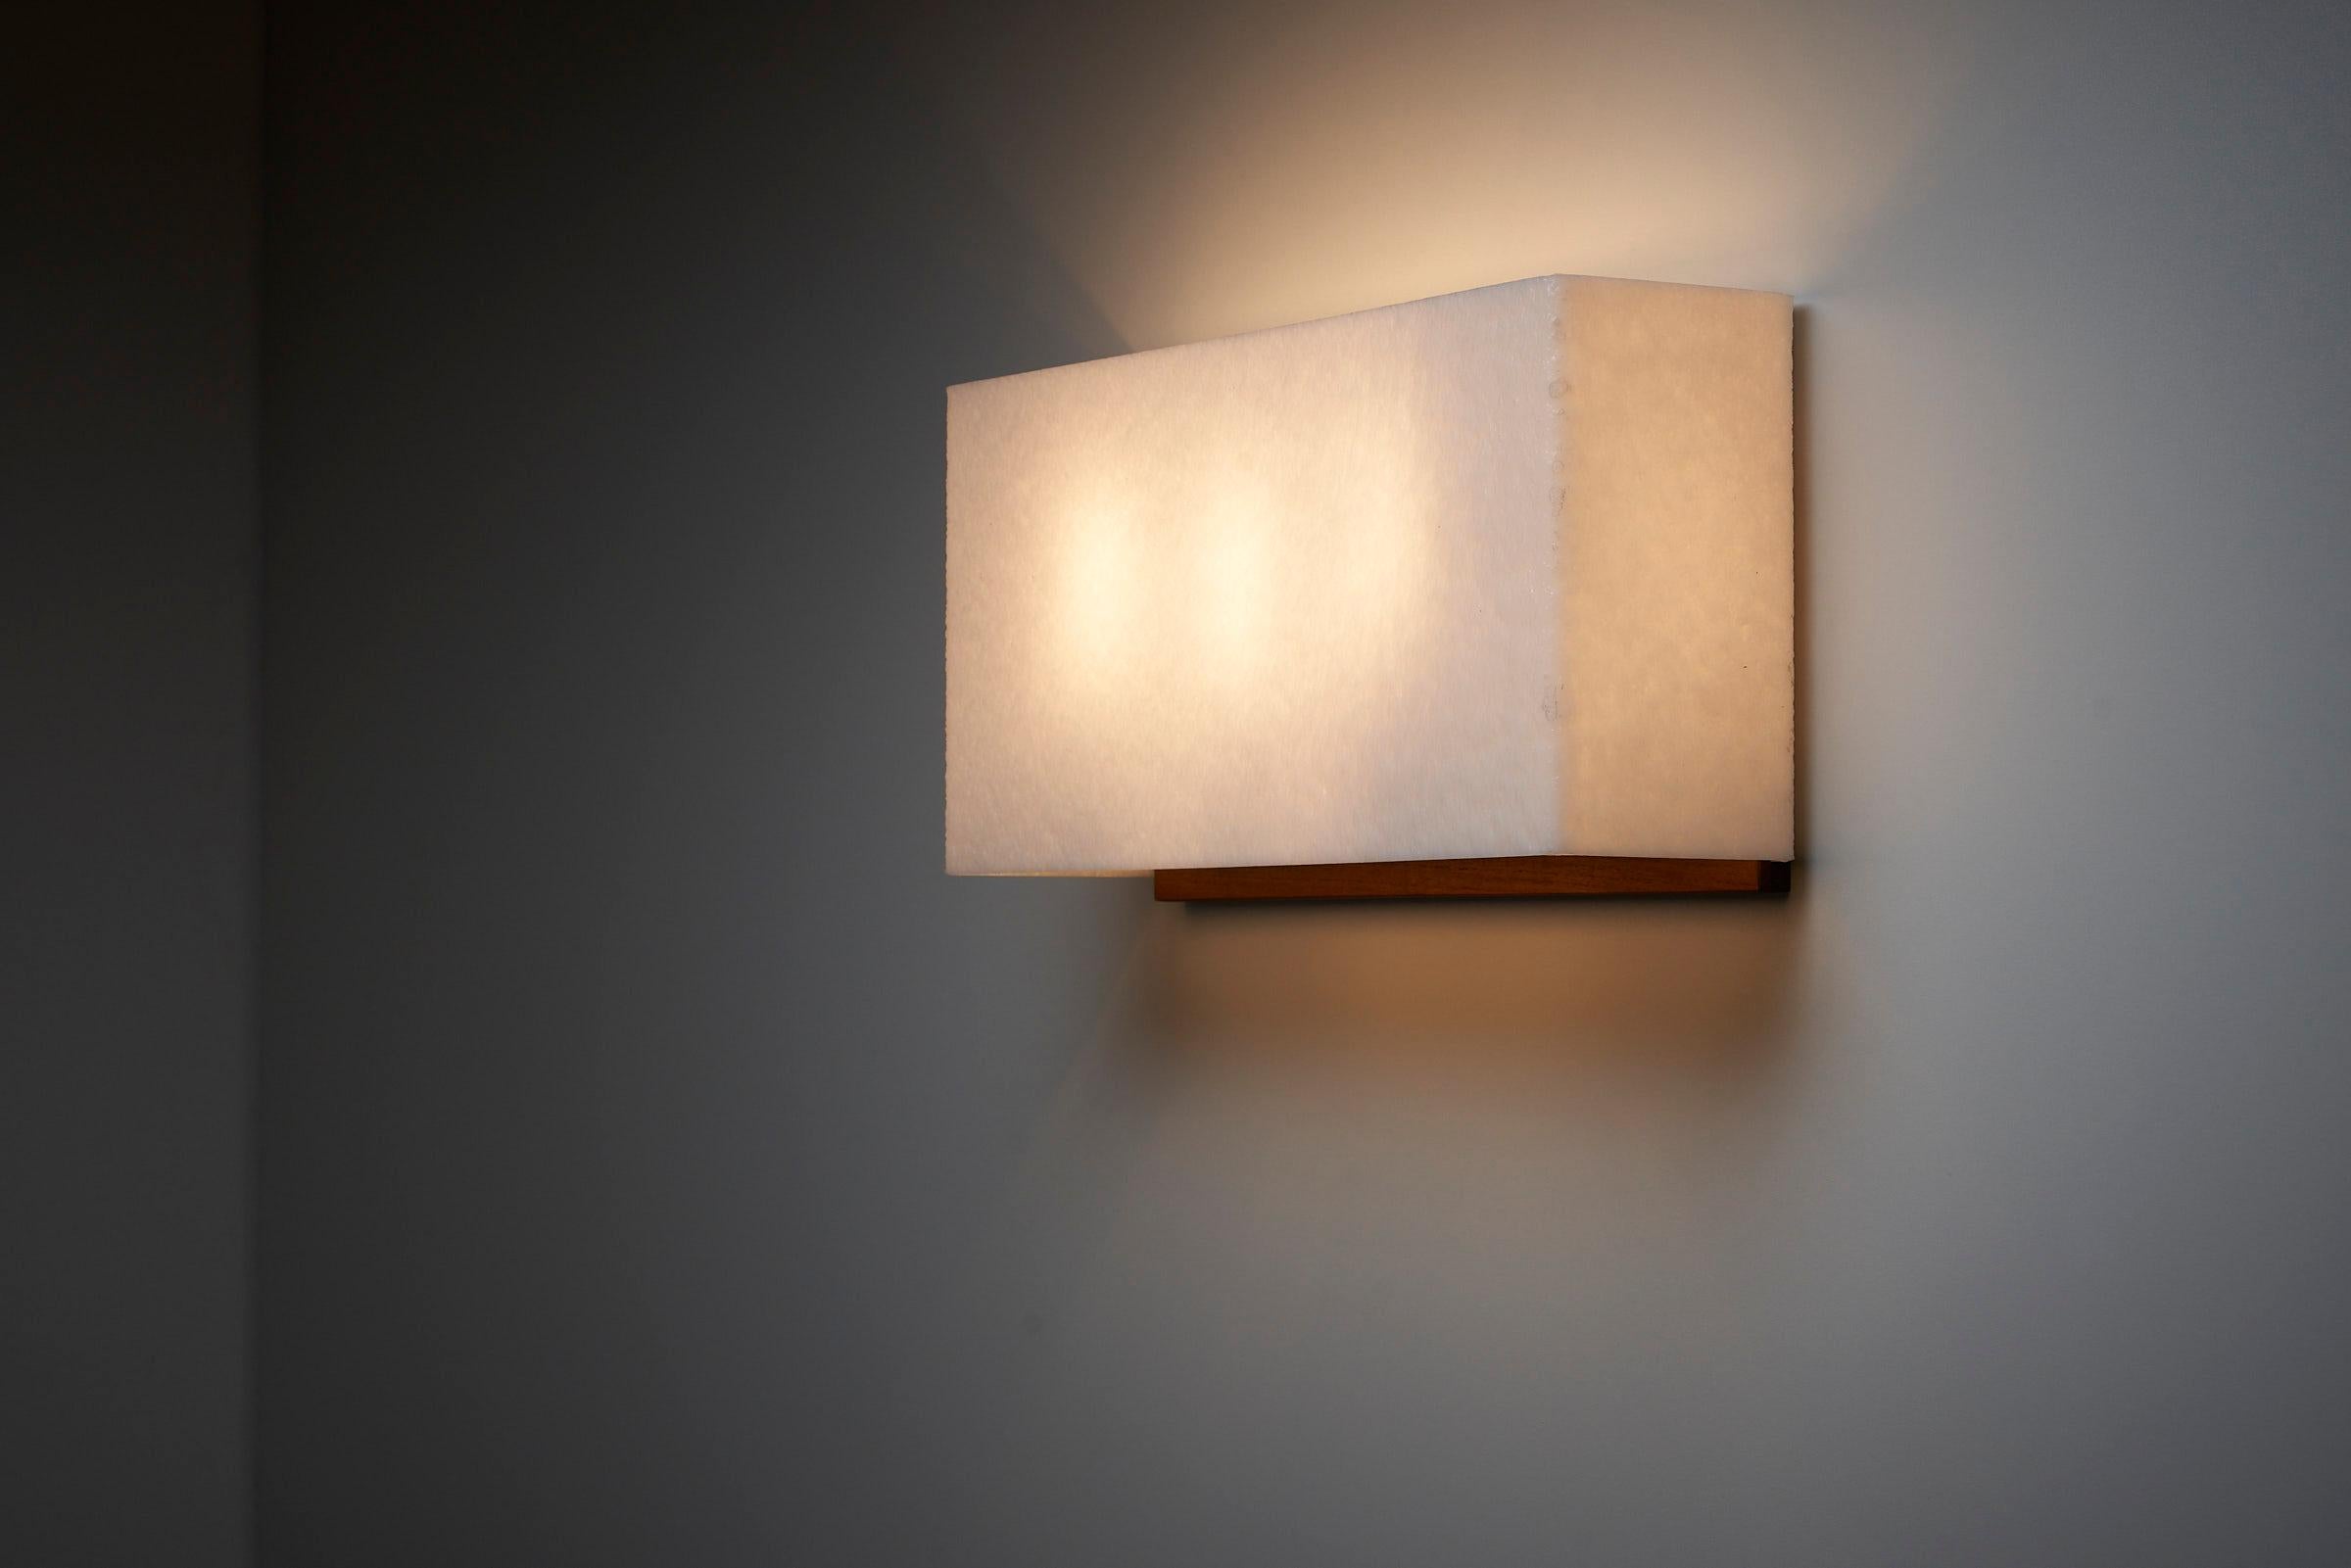 Large Wall Lamp With Textured Diffuser and Teak Frame by Kontakt-Werkstätten In Excellent Condition For Sale In Mortsel, BE